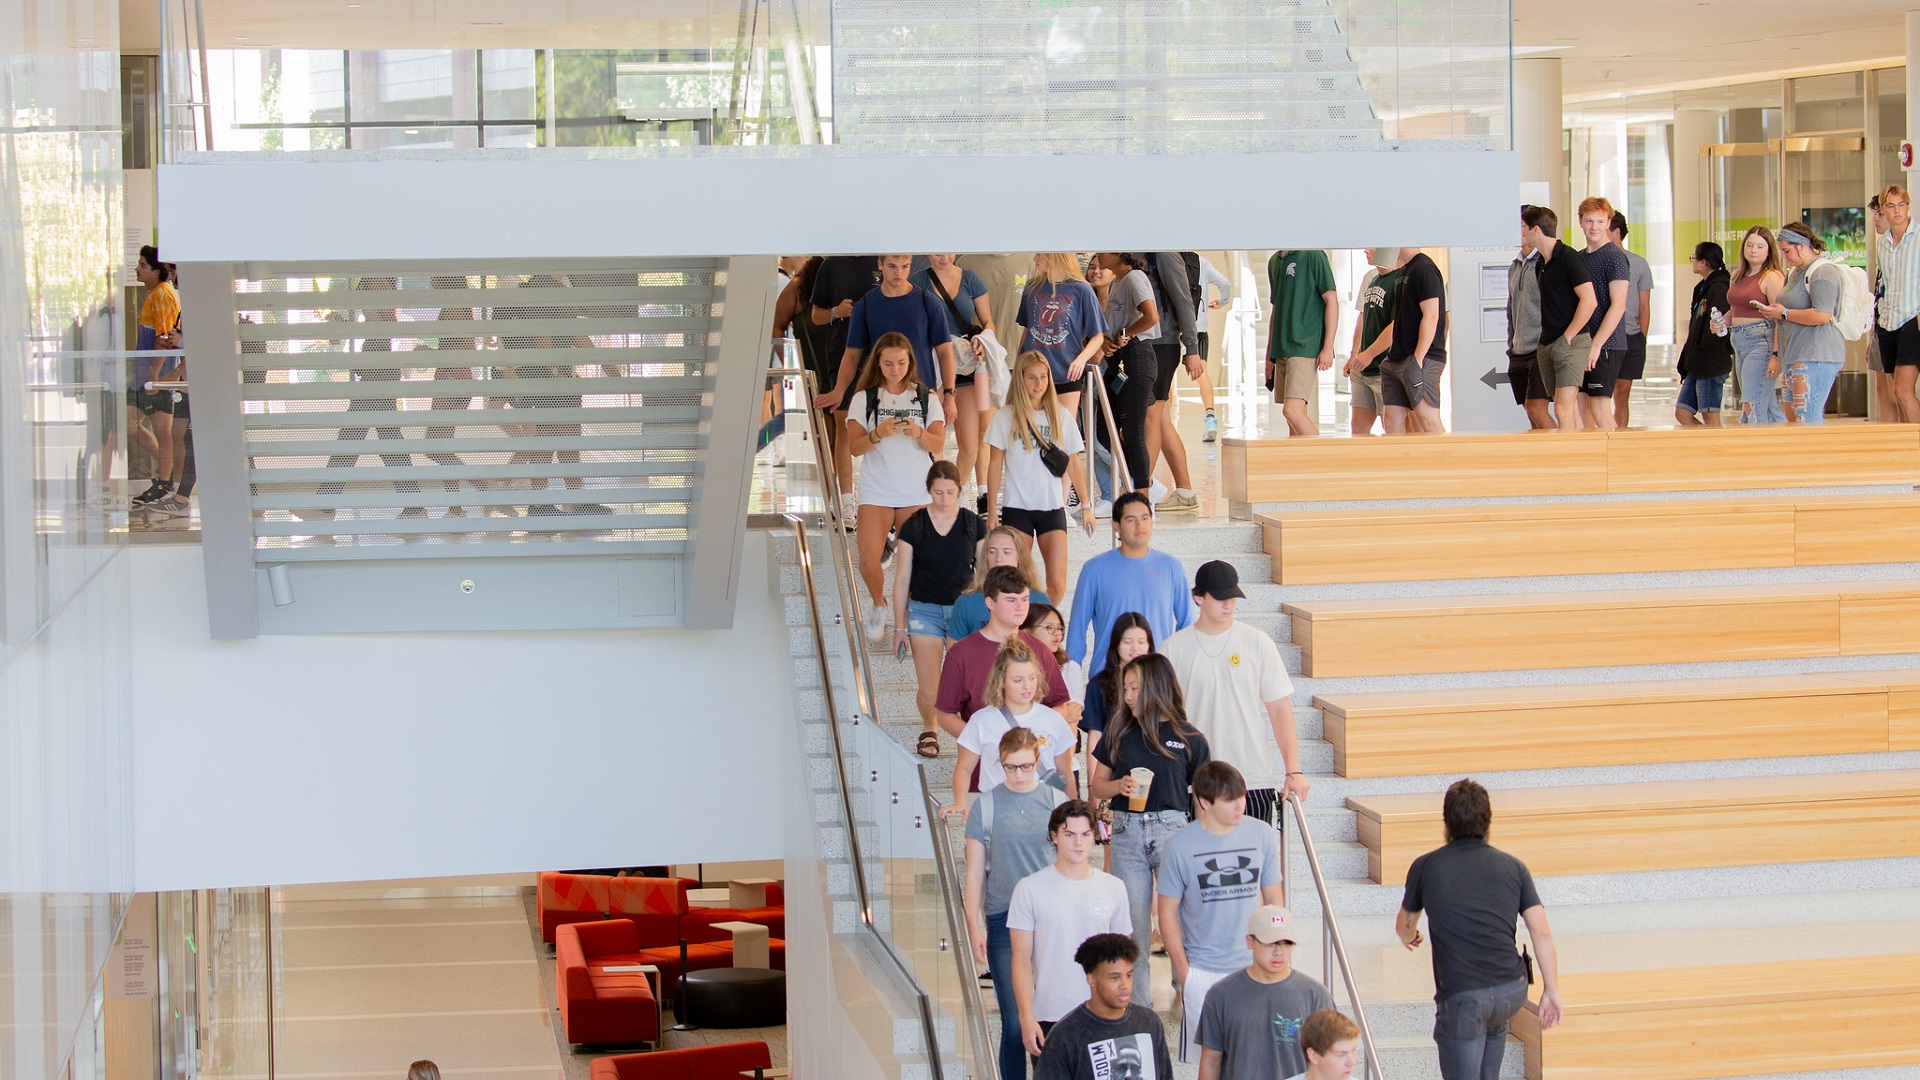 Students fill the Minskoff Pavilion's grand staircase during Welcome Week 2022.